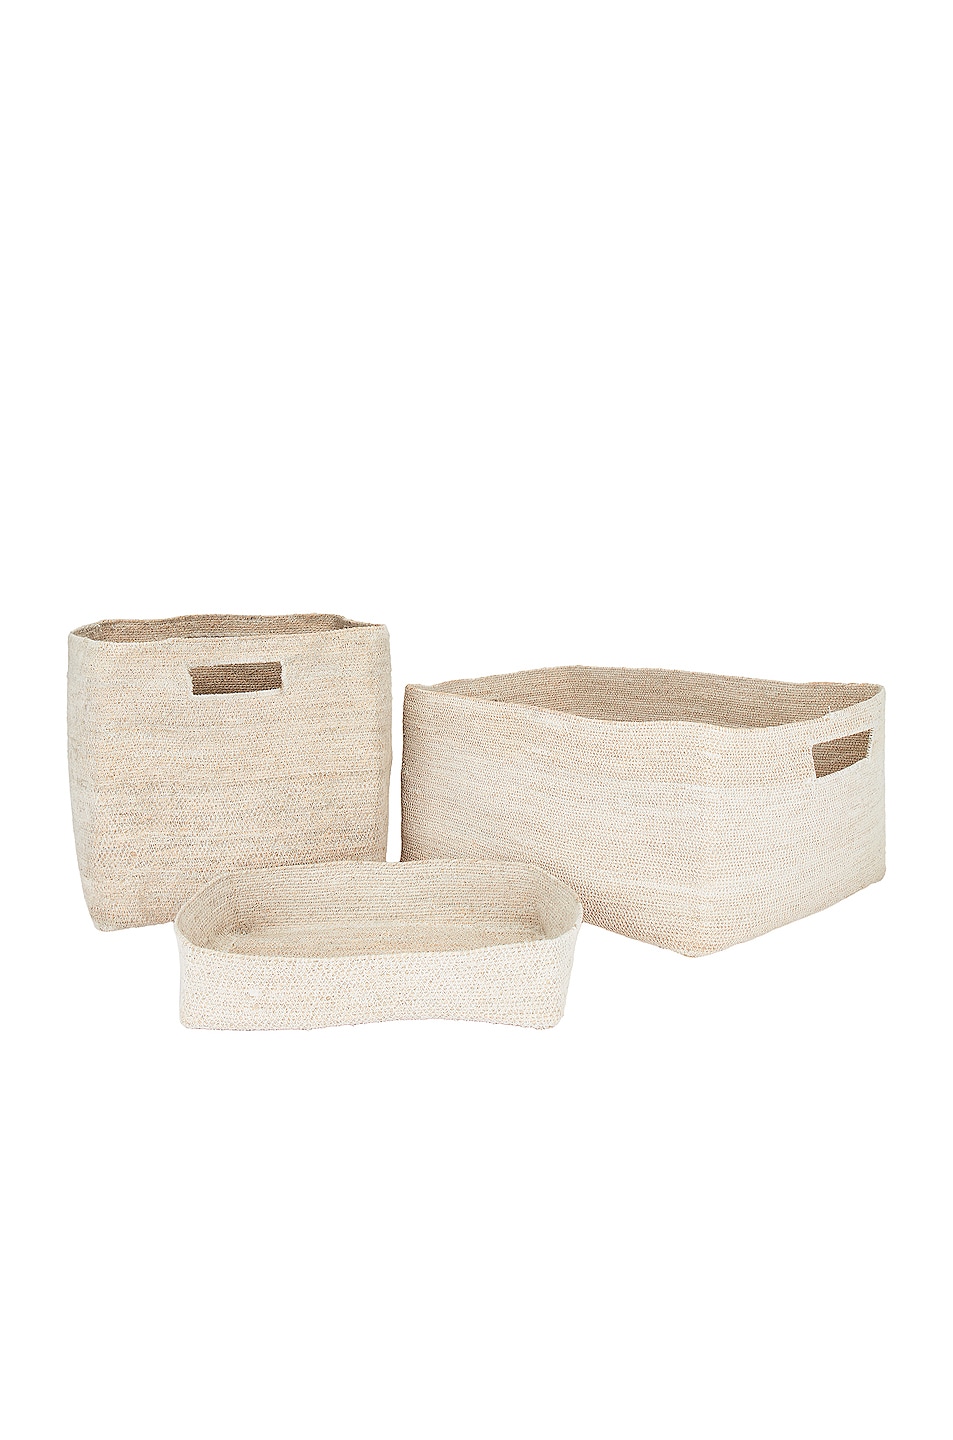 Image 1 of HAWKINS NEW YORK Essential Woven Storage Set Of 3 in White